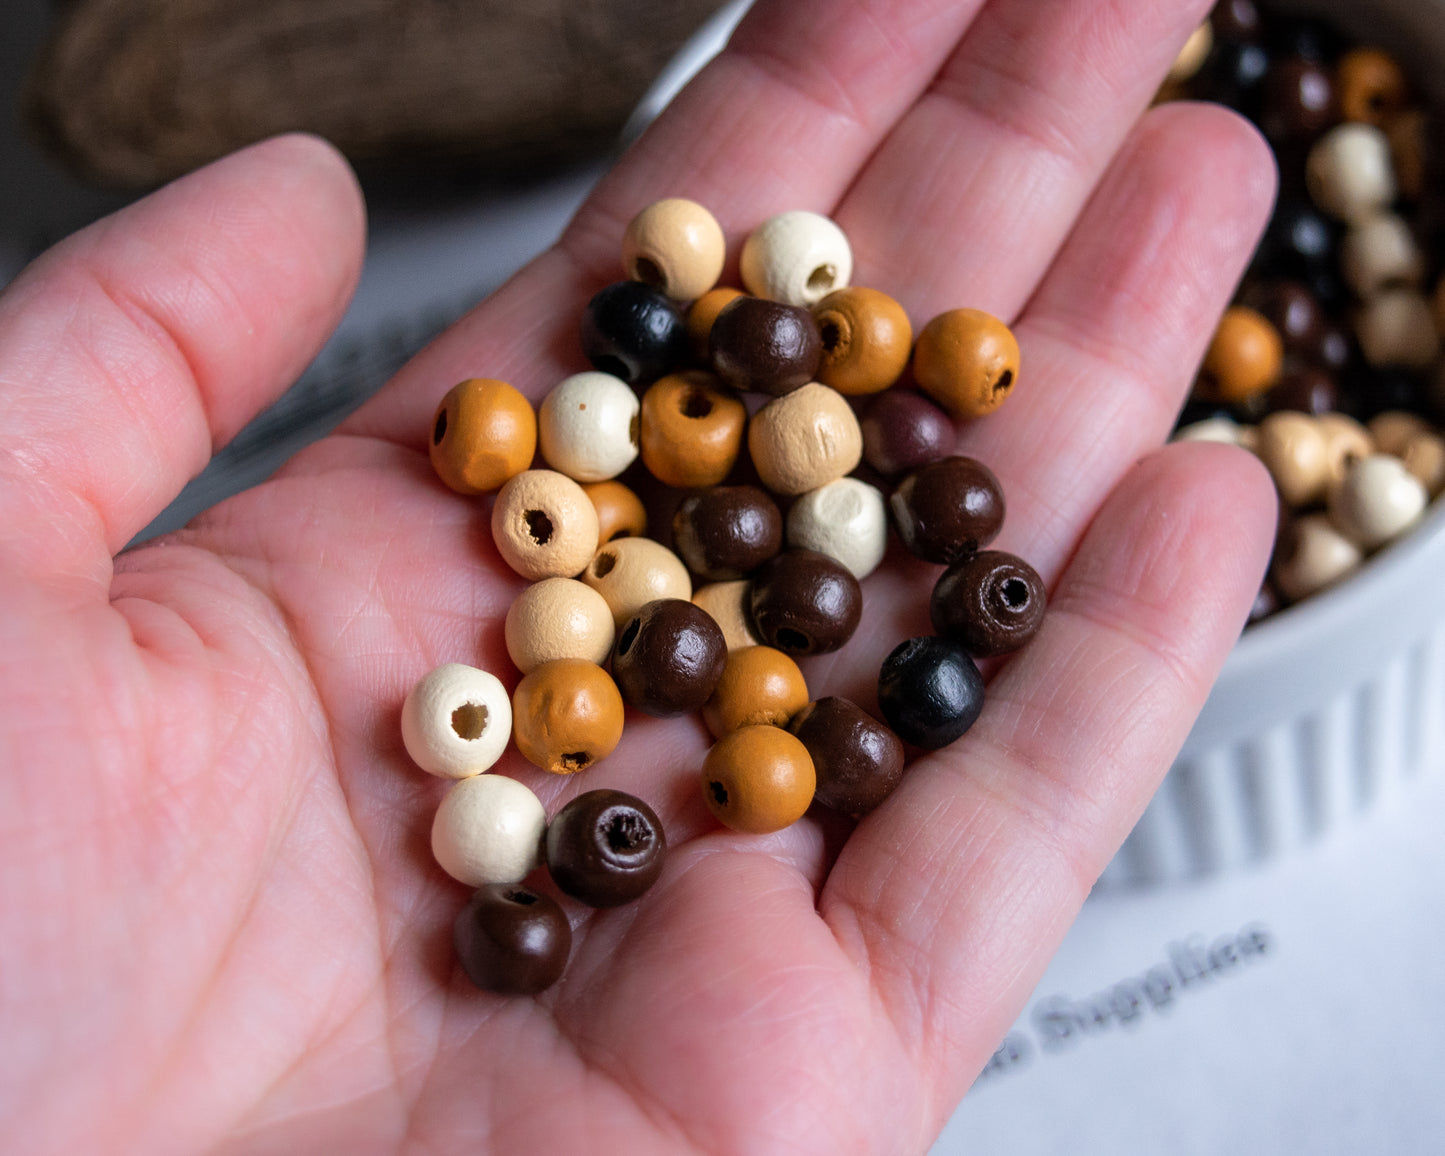 7x8mm Wooden Beads in Mixed Natural Tones, Rounded Shape